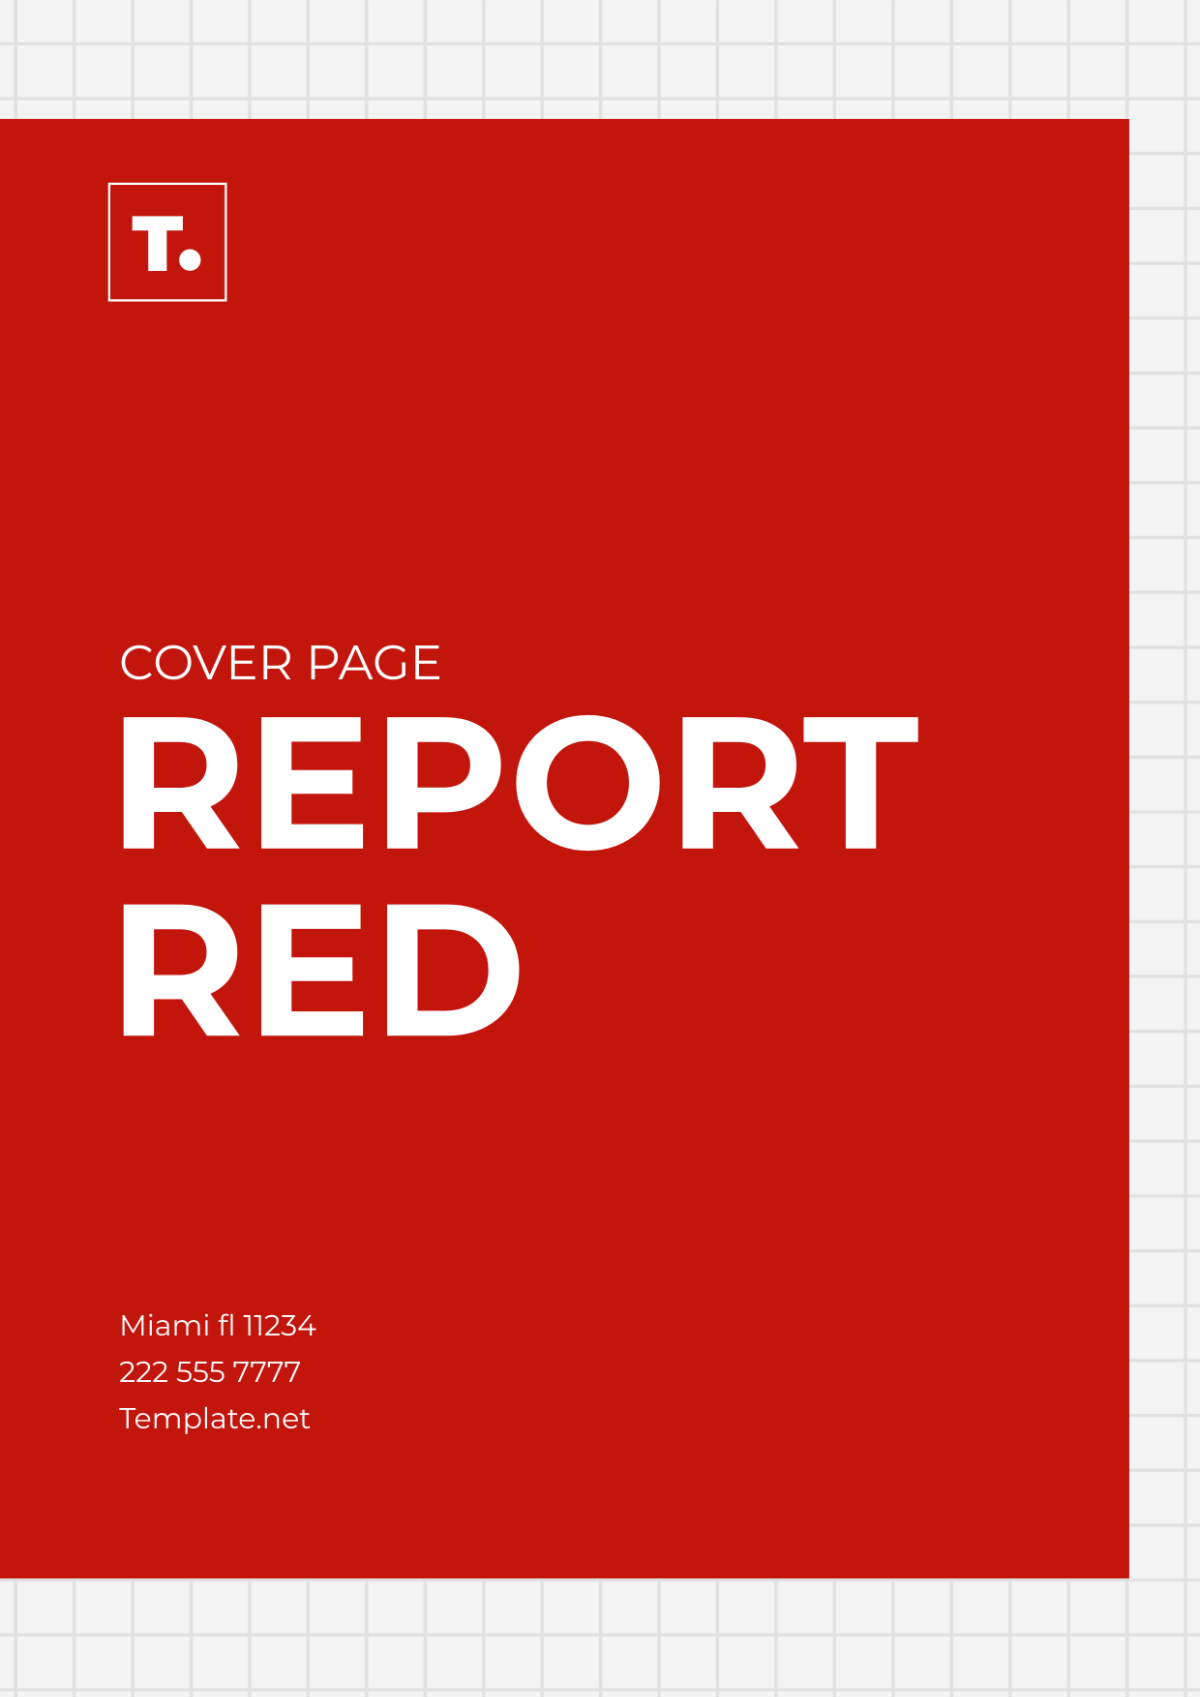 Report Red Cover Page Template